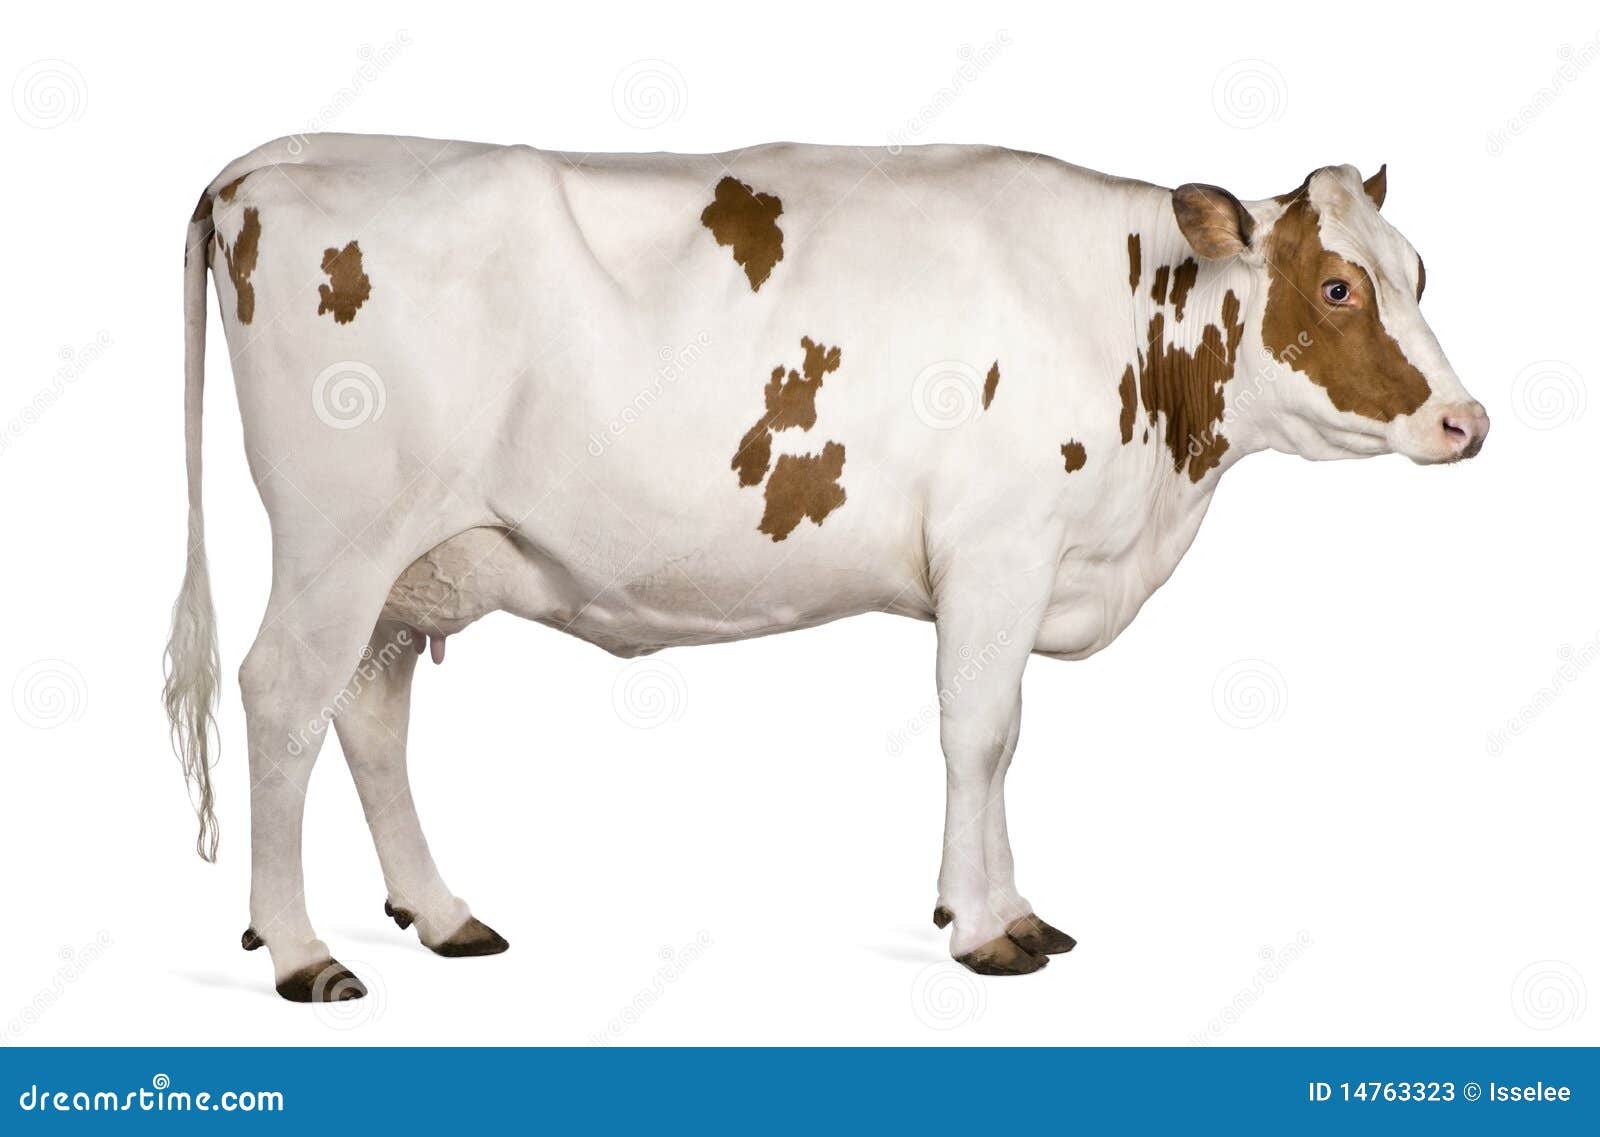 holstein cow, 4 years old, standing